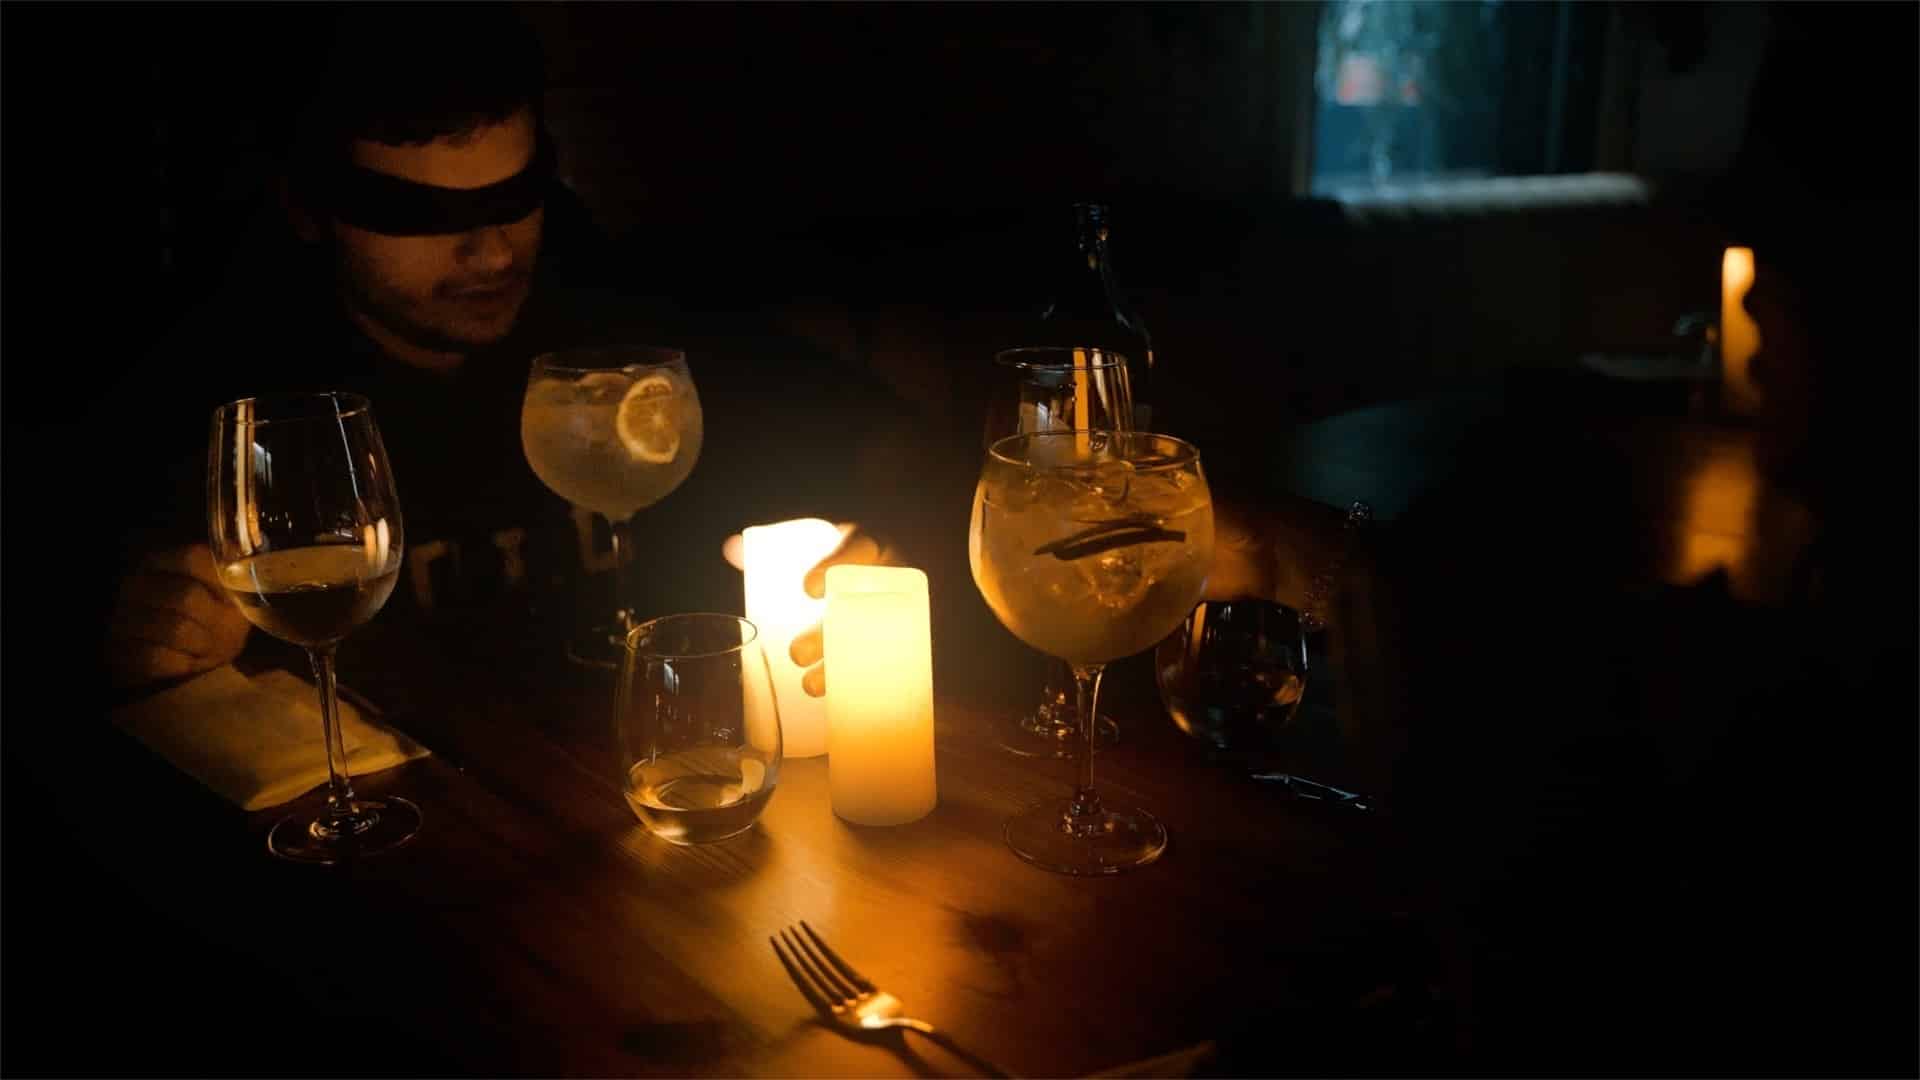 Dining in the Dark - Fall/Winter Special: A Unique Blindfolded Dining Experience